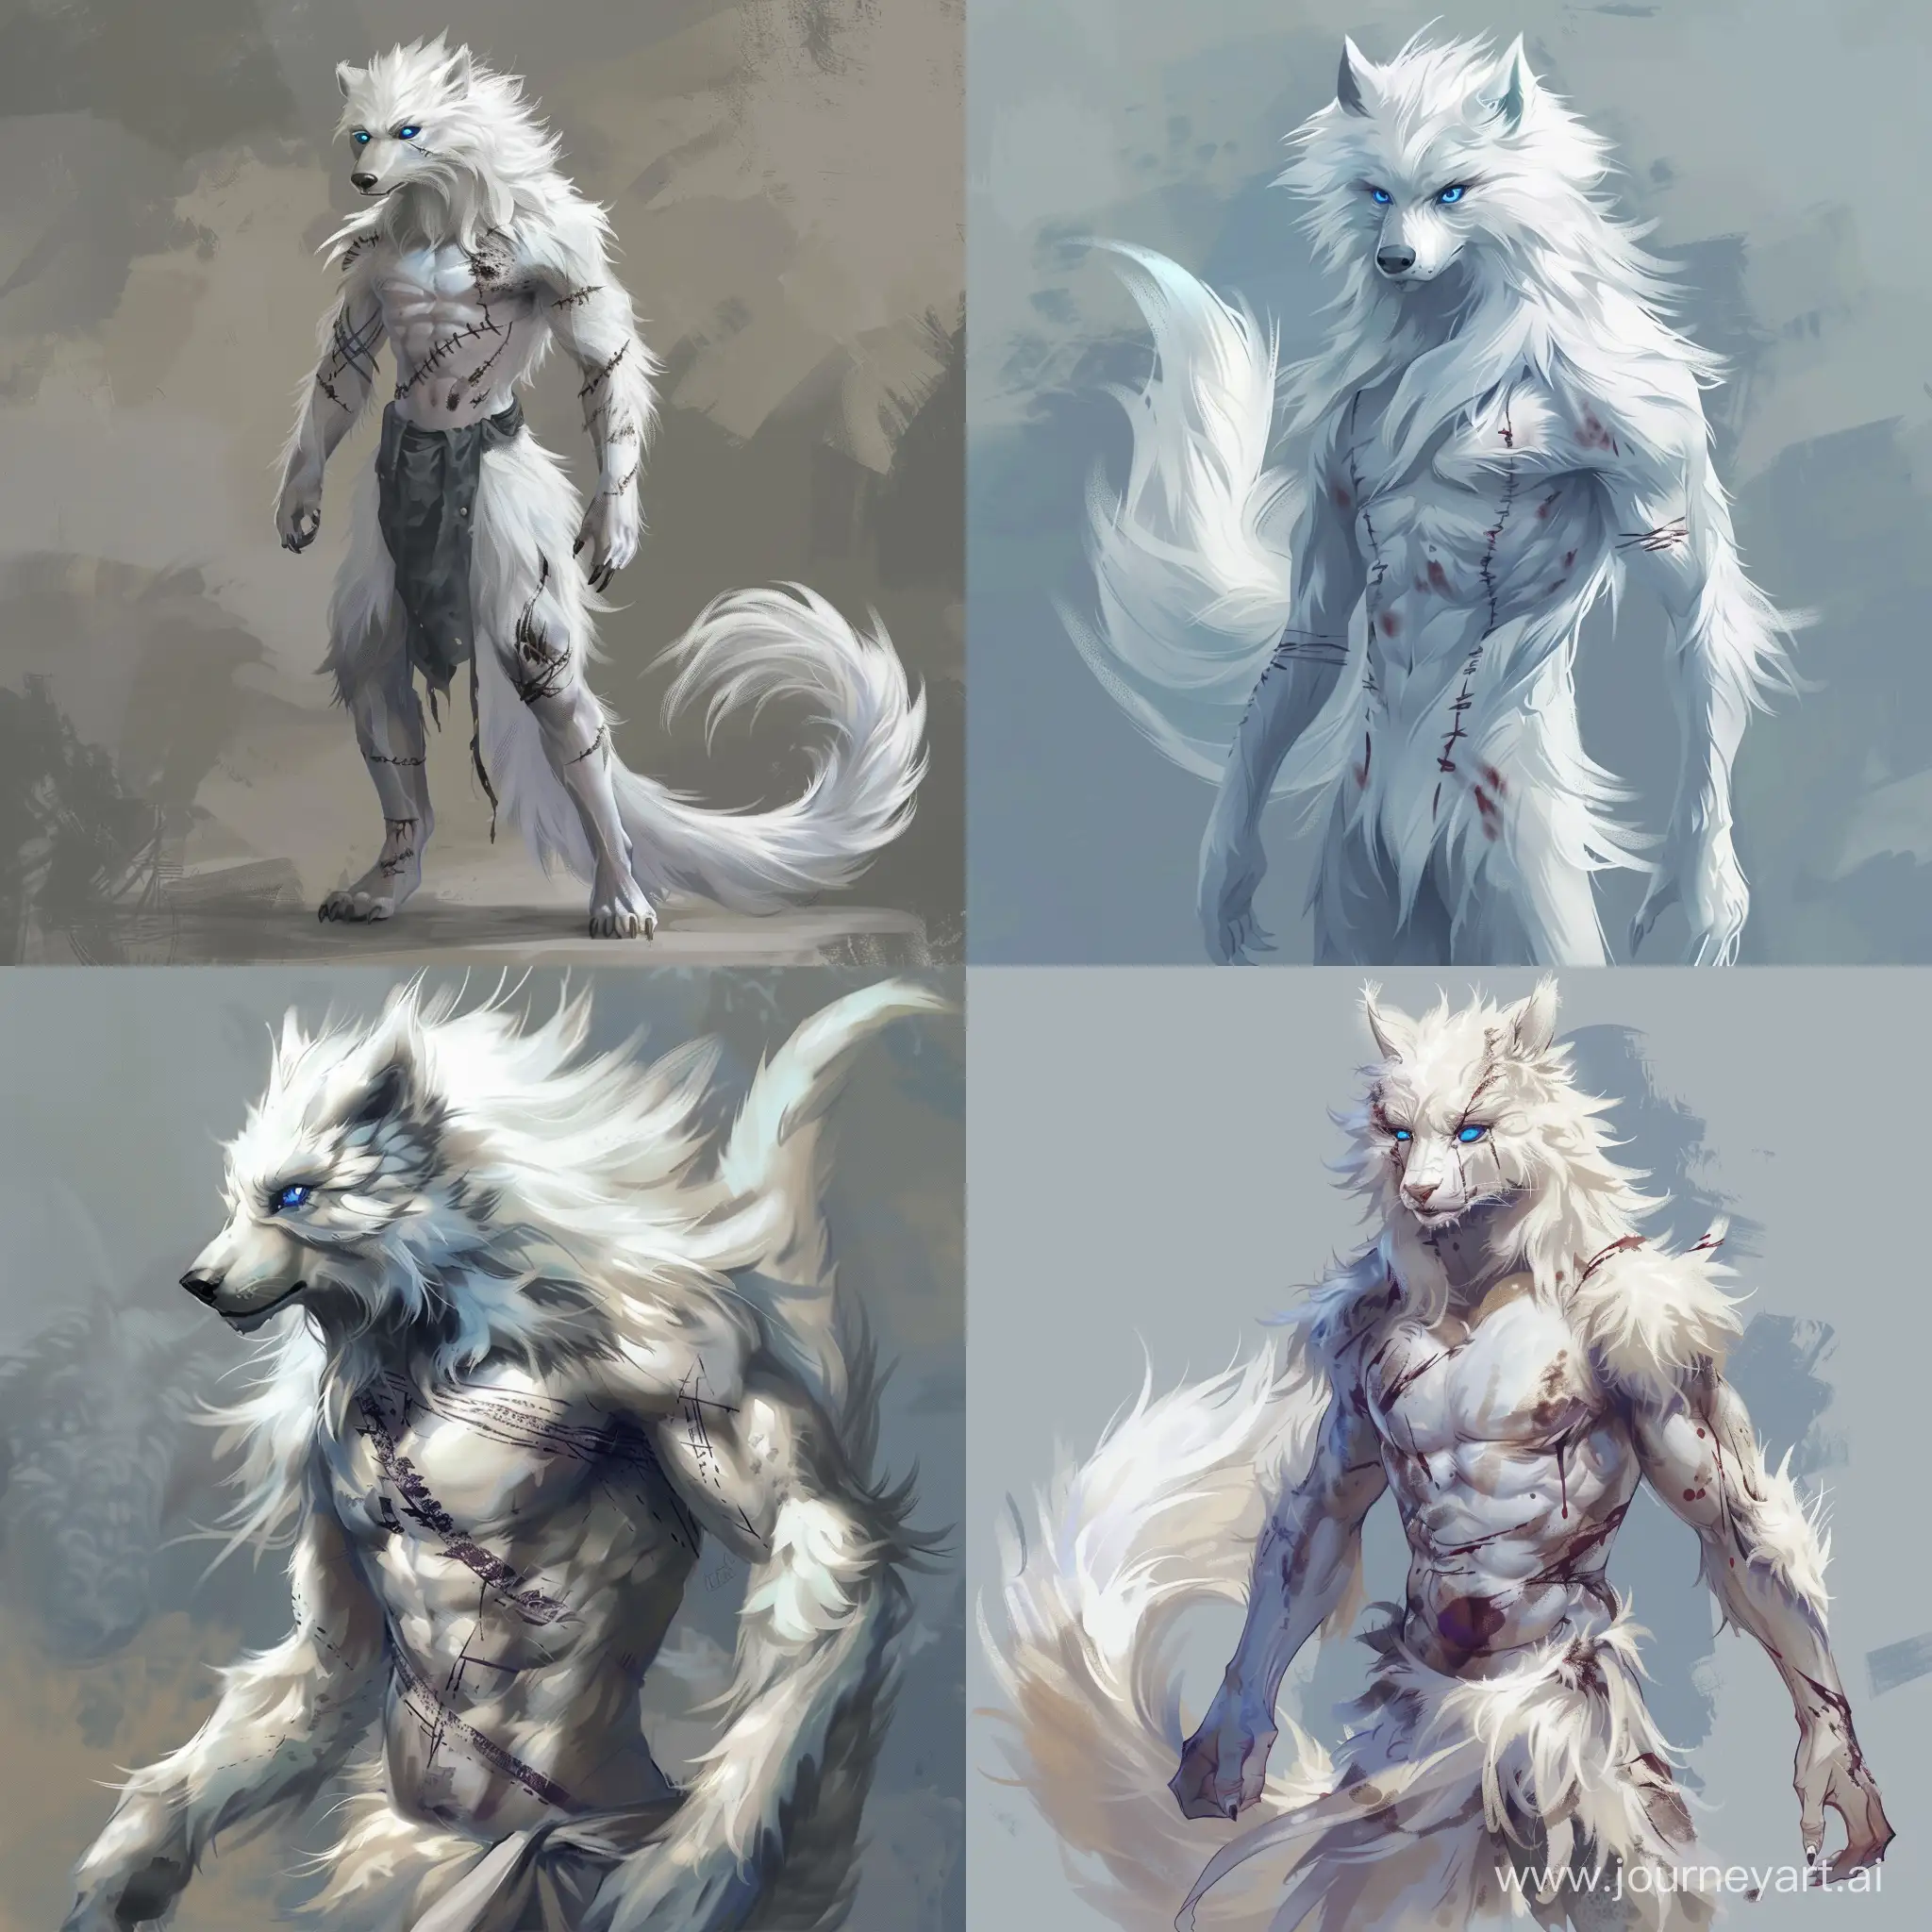 Male werewolf. White fluffy fur. Blue eyes. Scars across all body. Long tail. Thin and slender body.